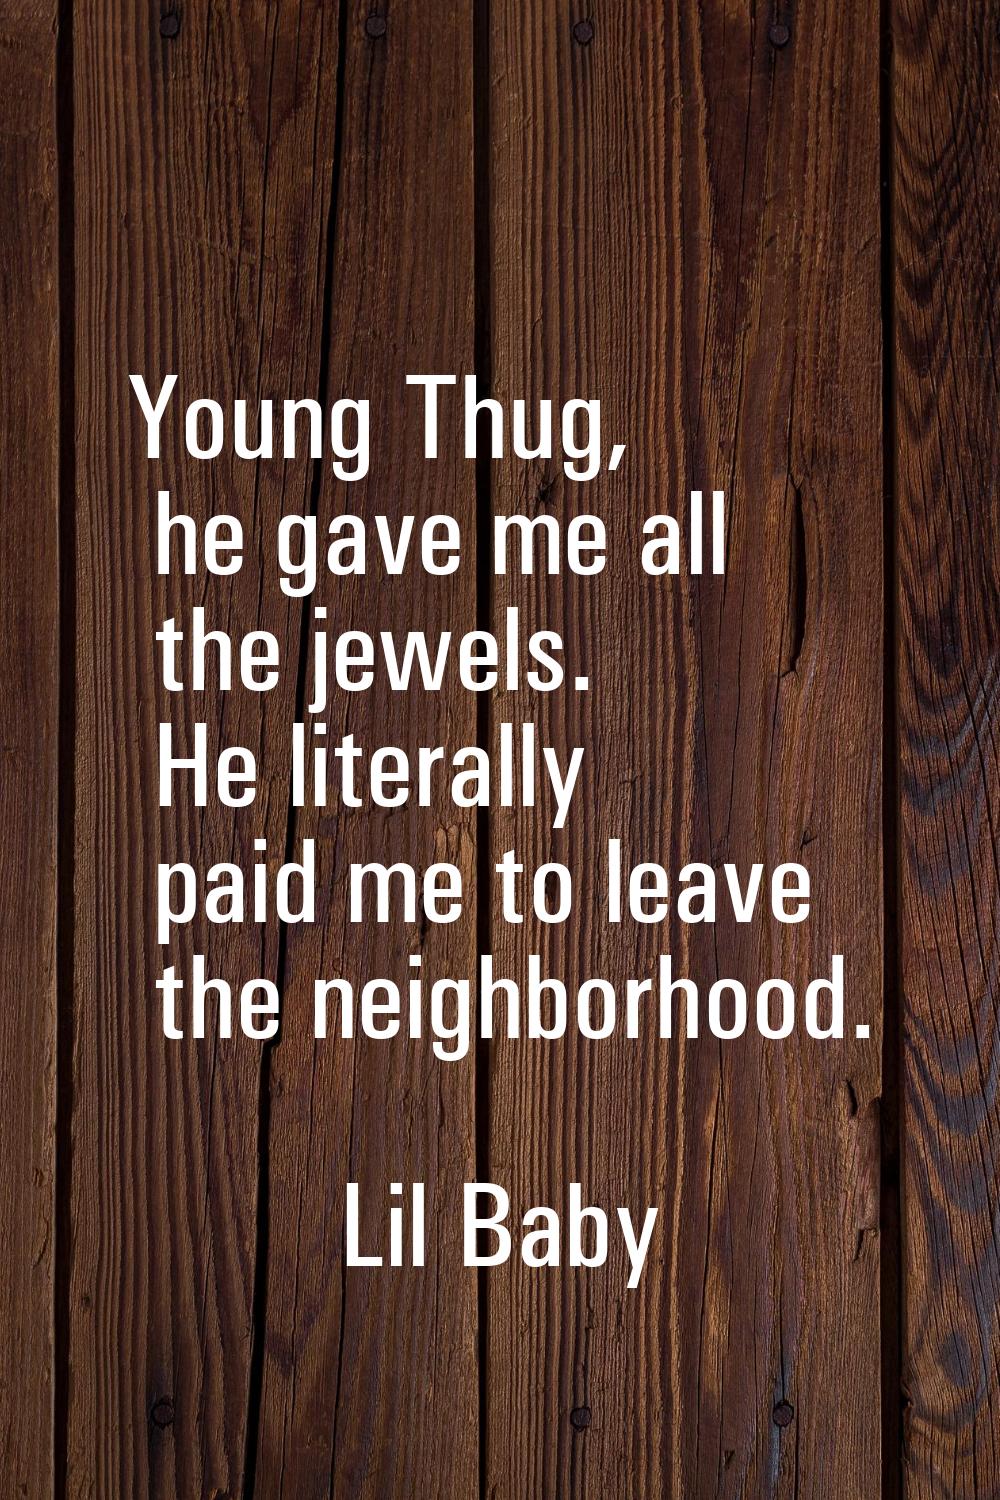 Young Thug, he gave me all the jewels. He literally paid me to leave the neighborhood.